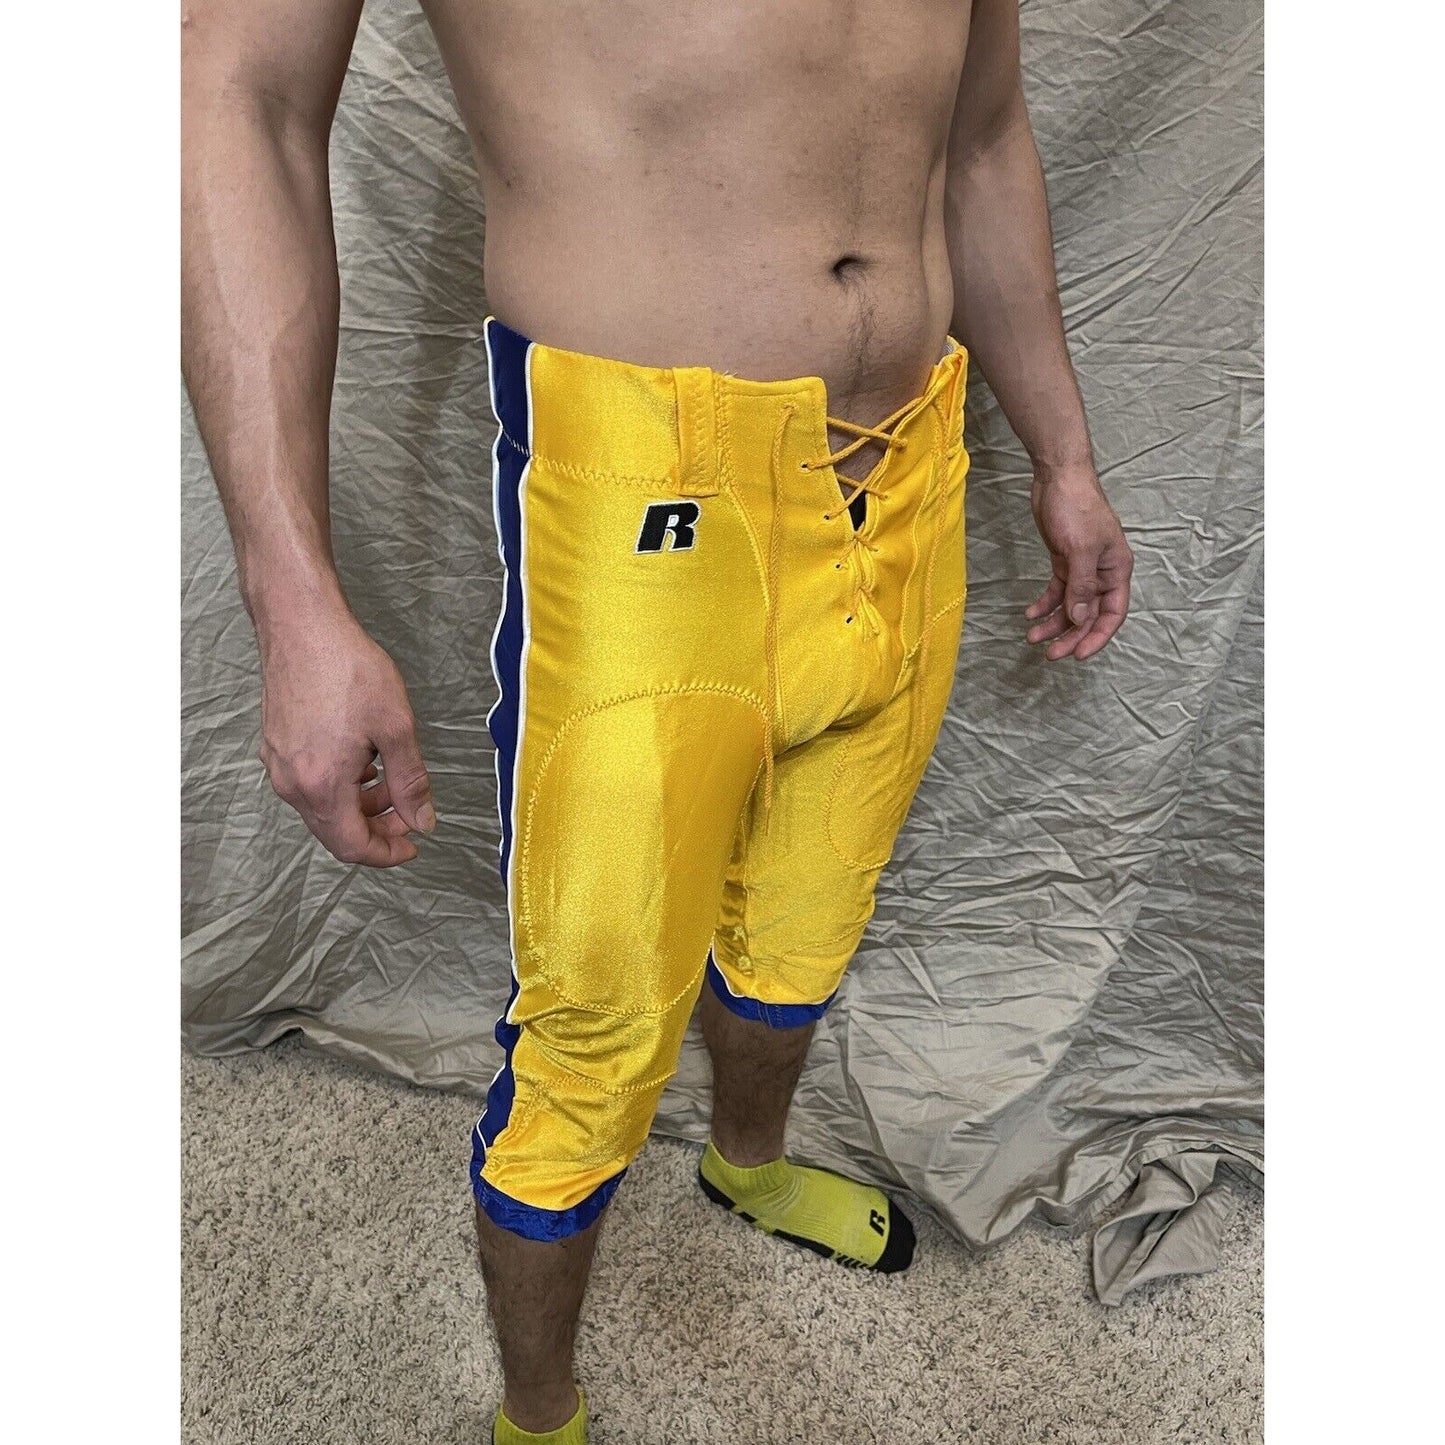 men's gold/yellow/blue russell athletics size 34 football pants